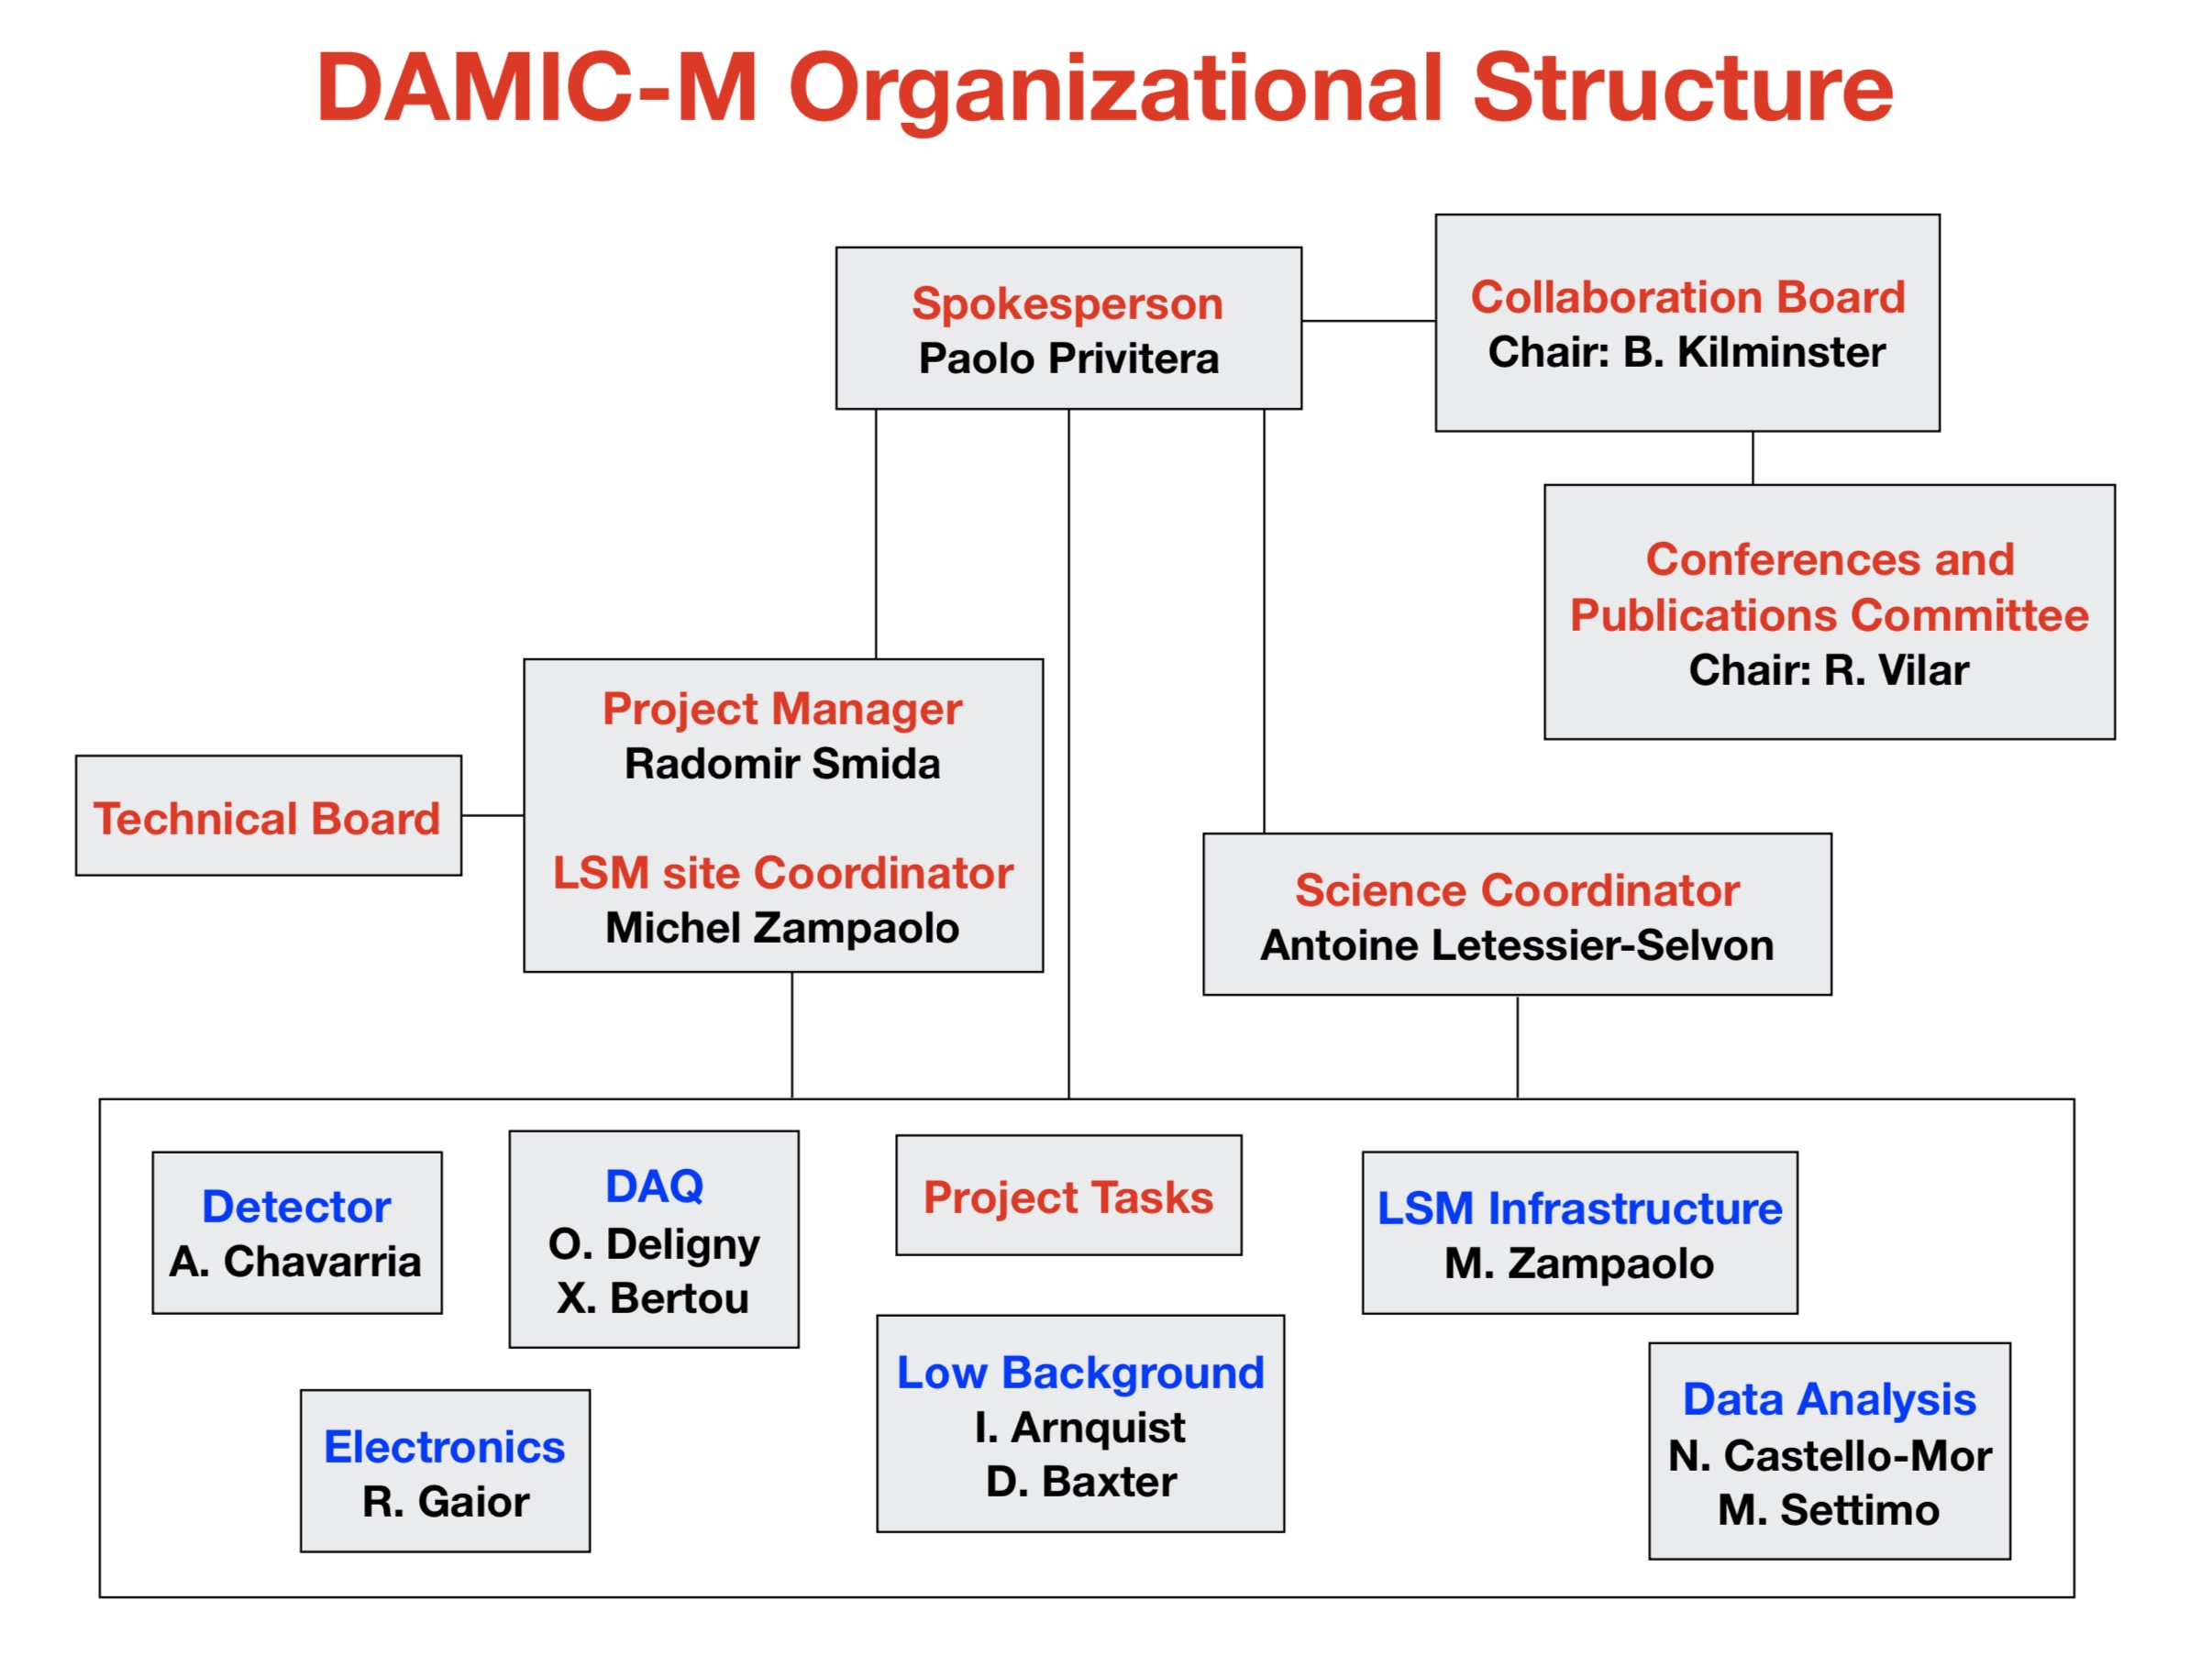 Picture: Organizational Structure